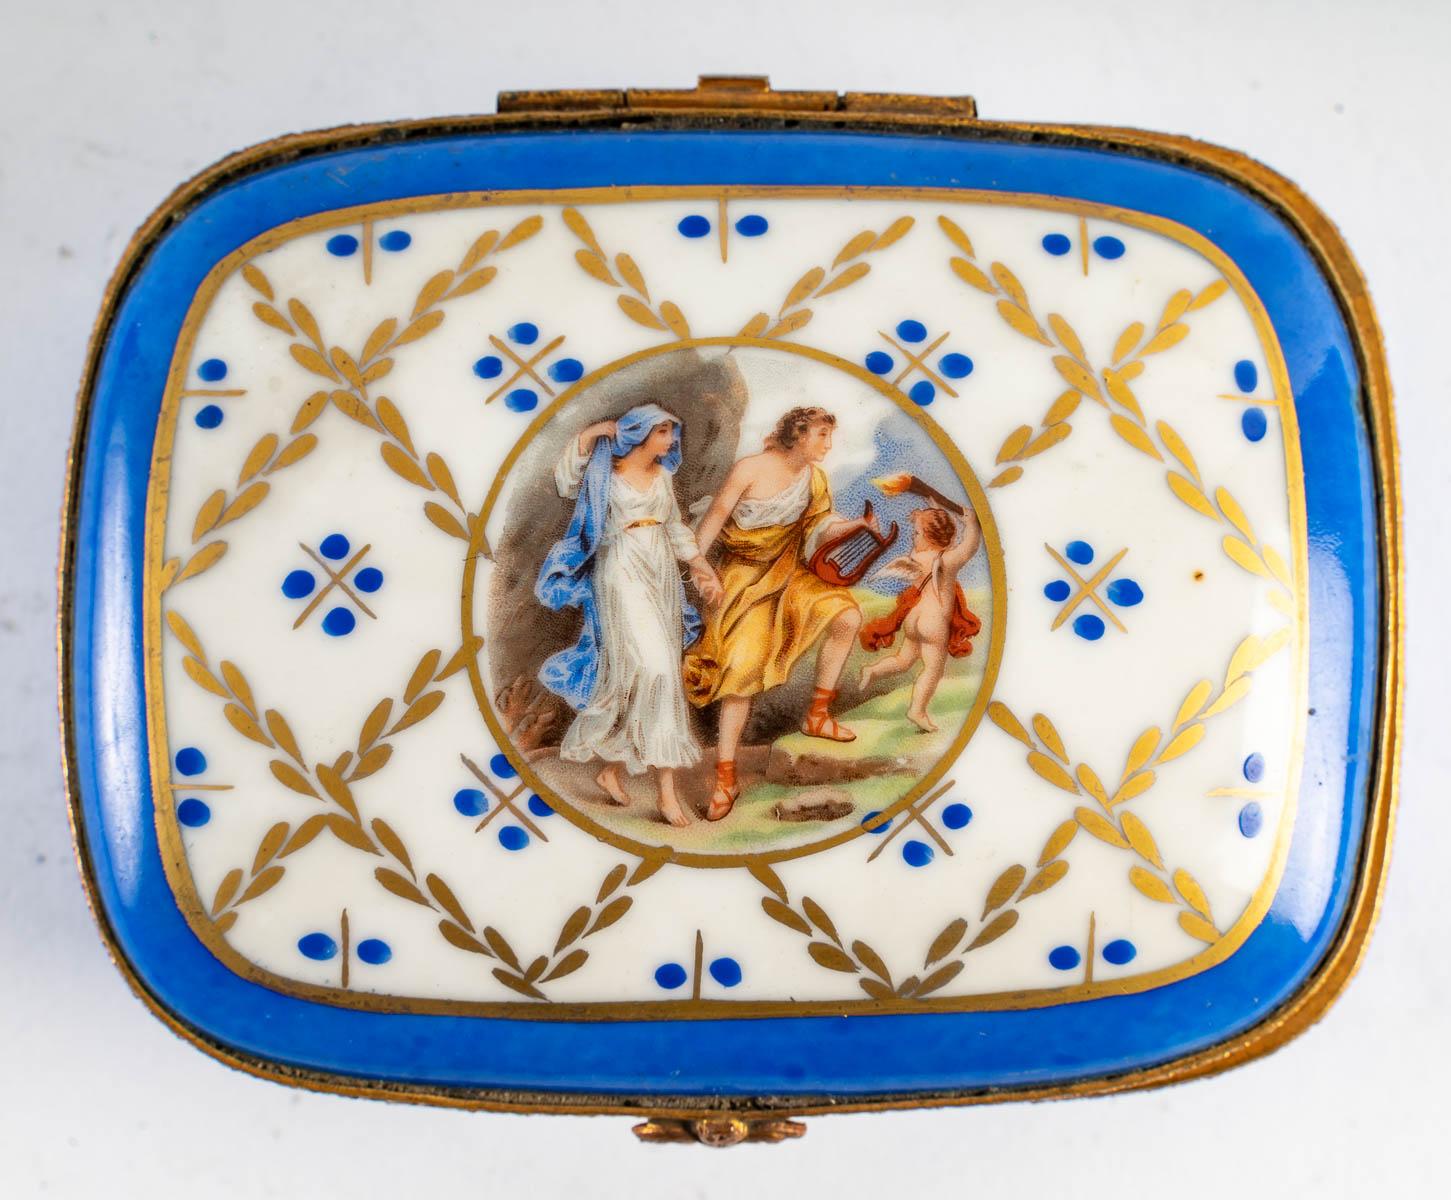 Porcelain box, late 19th - early 20th century.

Porcelain box from the end of the 19th century or beginning of the 20th century, gilded brass, very nice painted scene with gold decoration.

Measures: H: 5 cm, W: 12.5 cm, D: 10 cm.